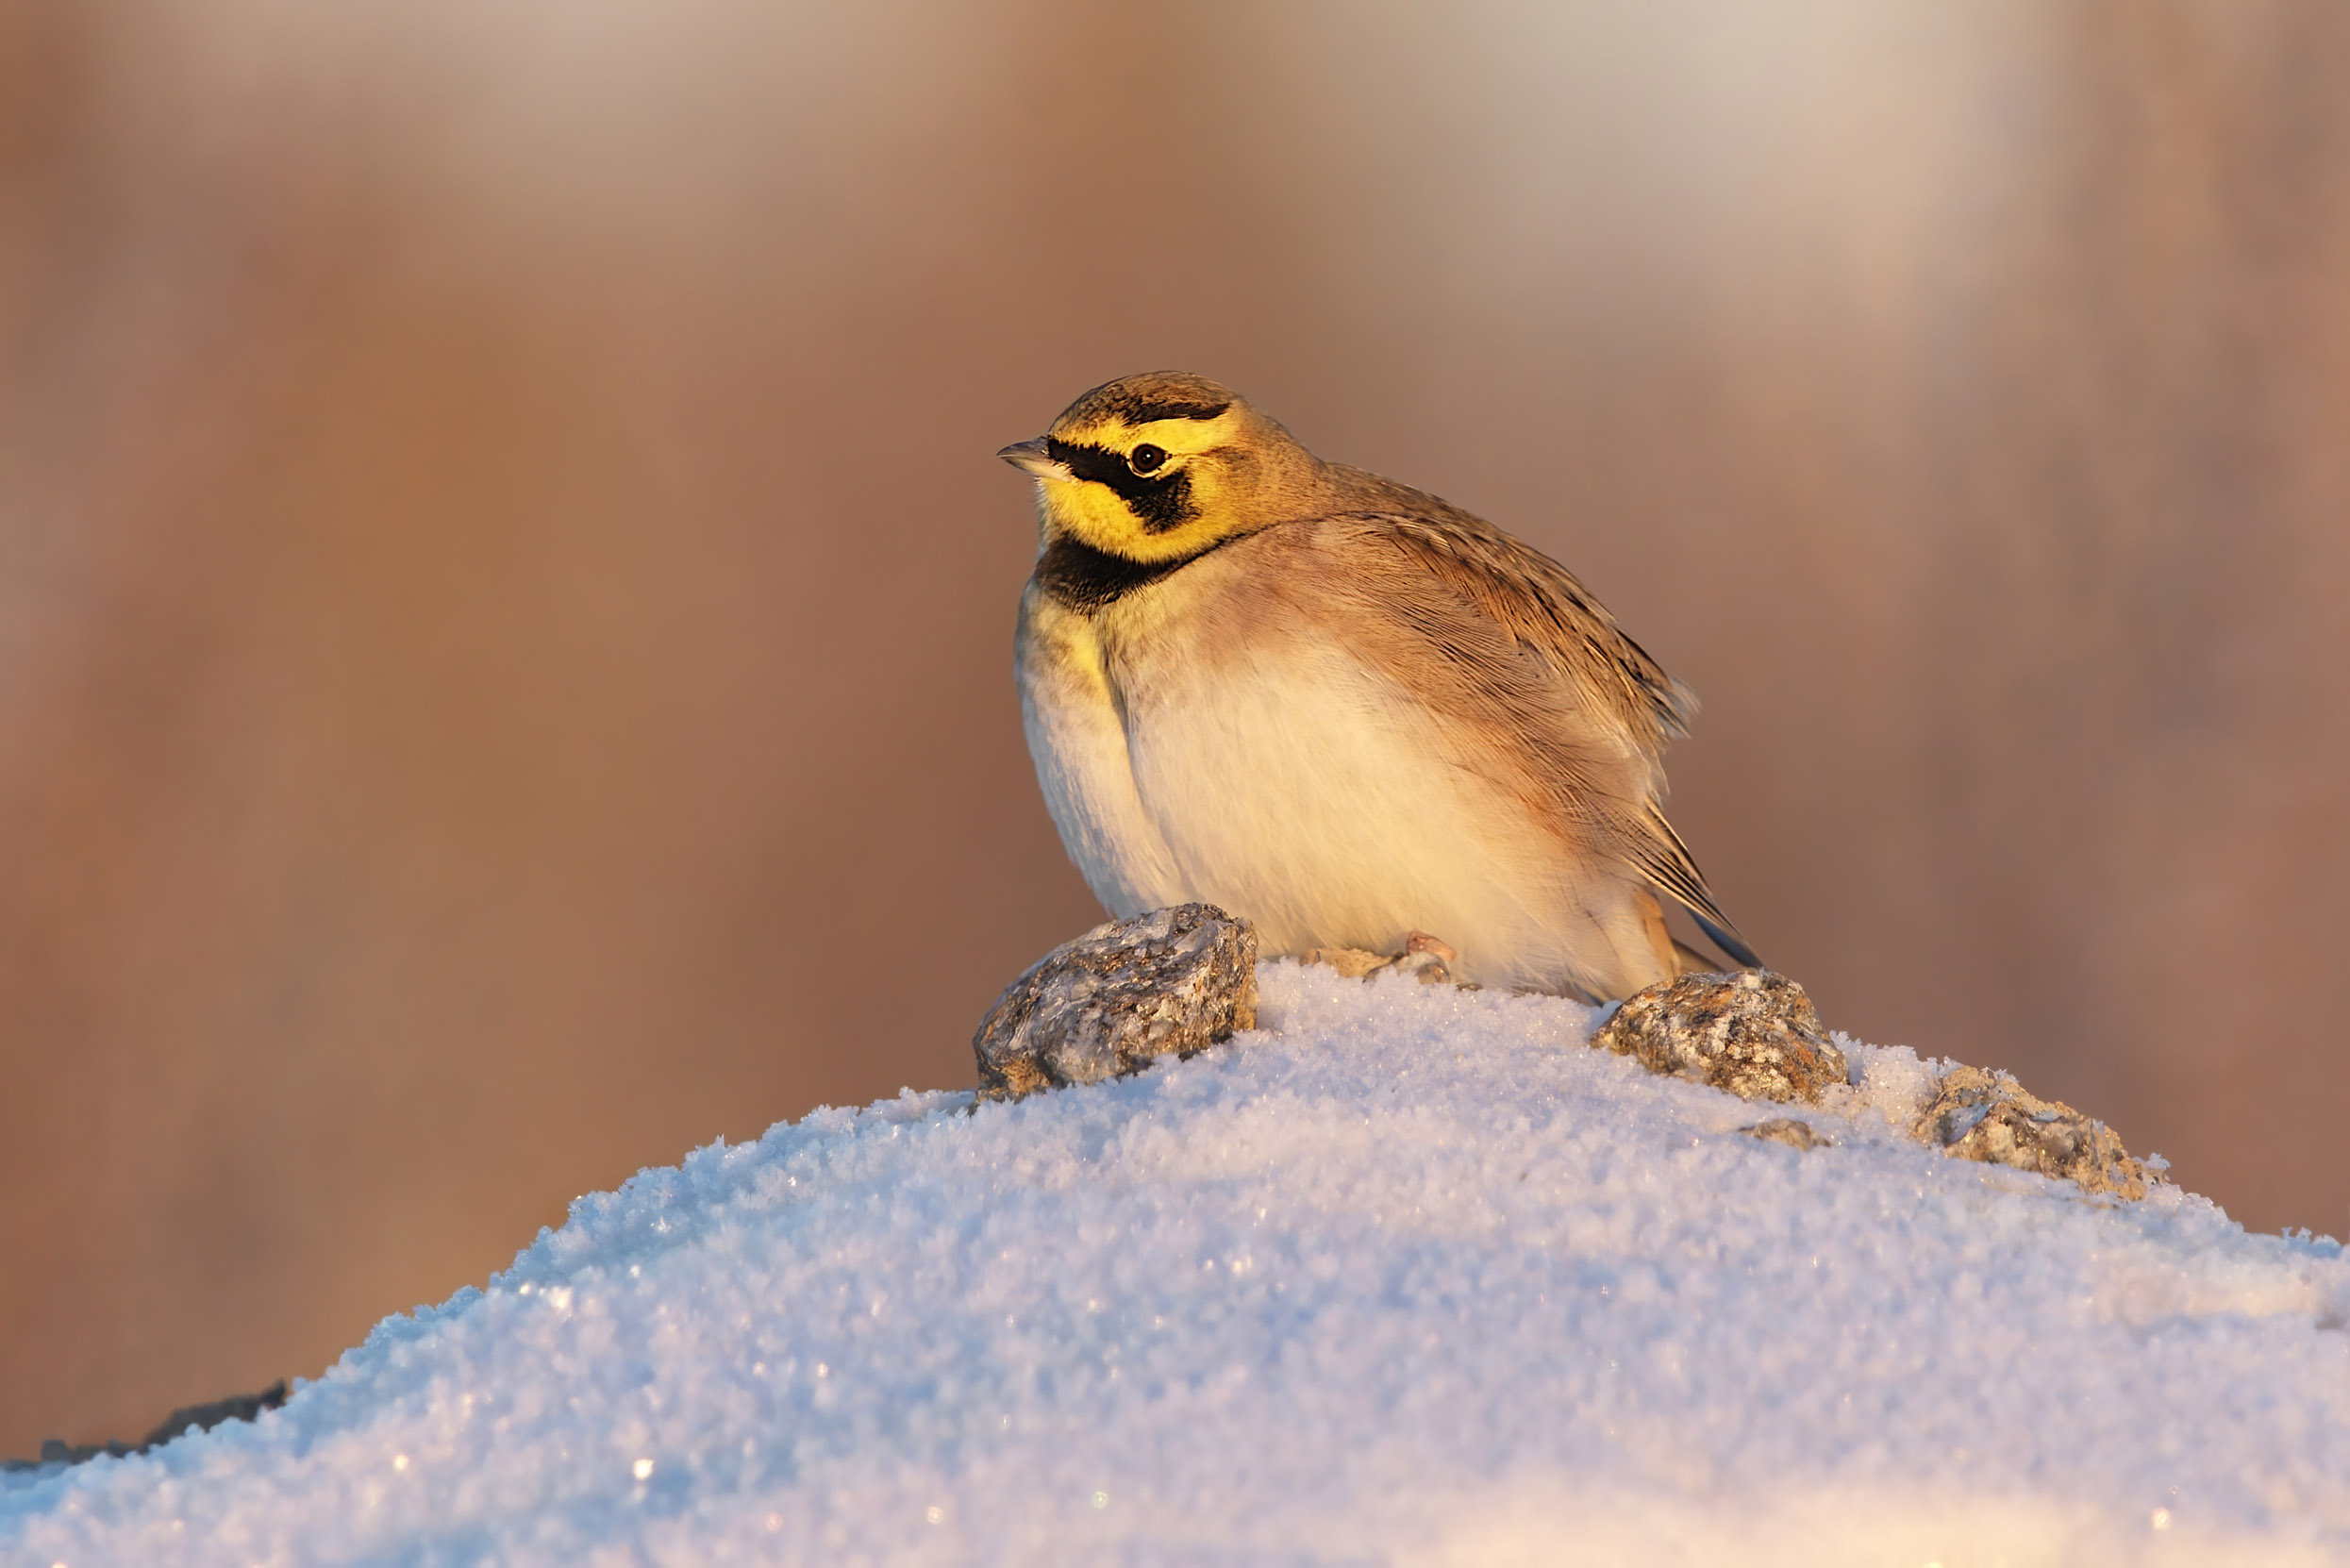 A lone Shore Lark perched on a pile of snow.